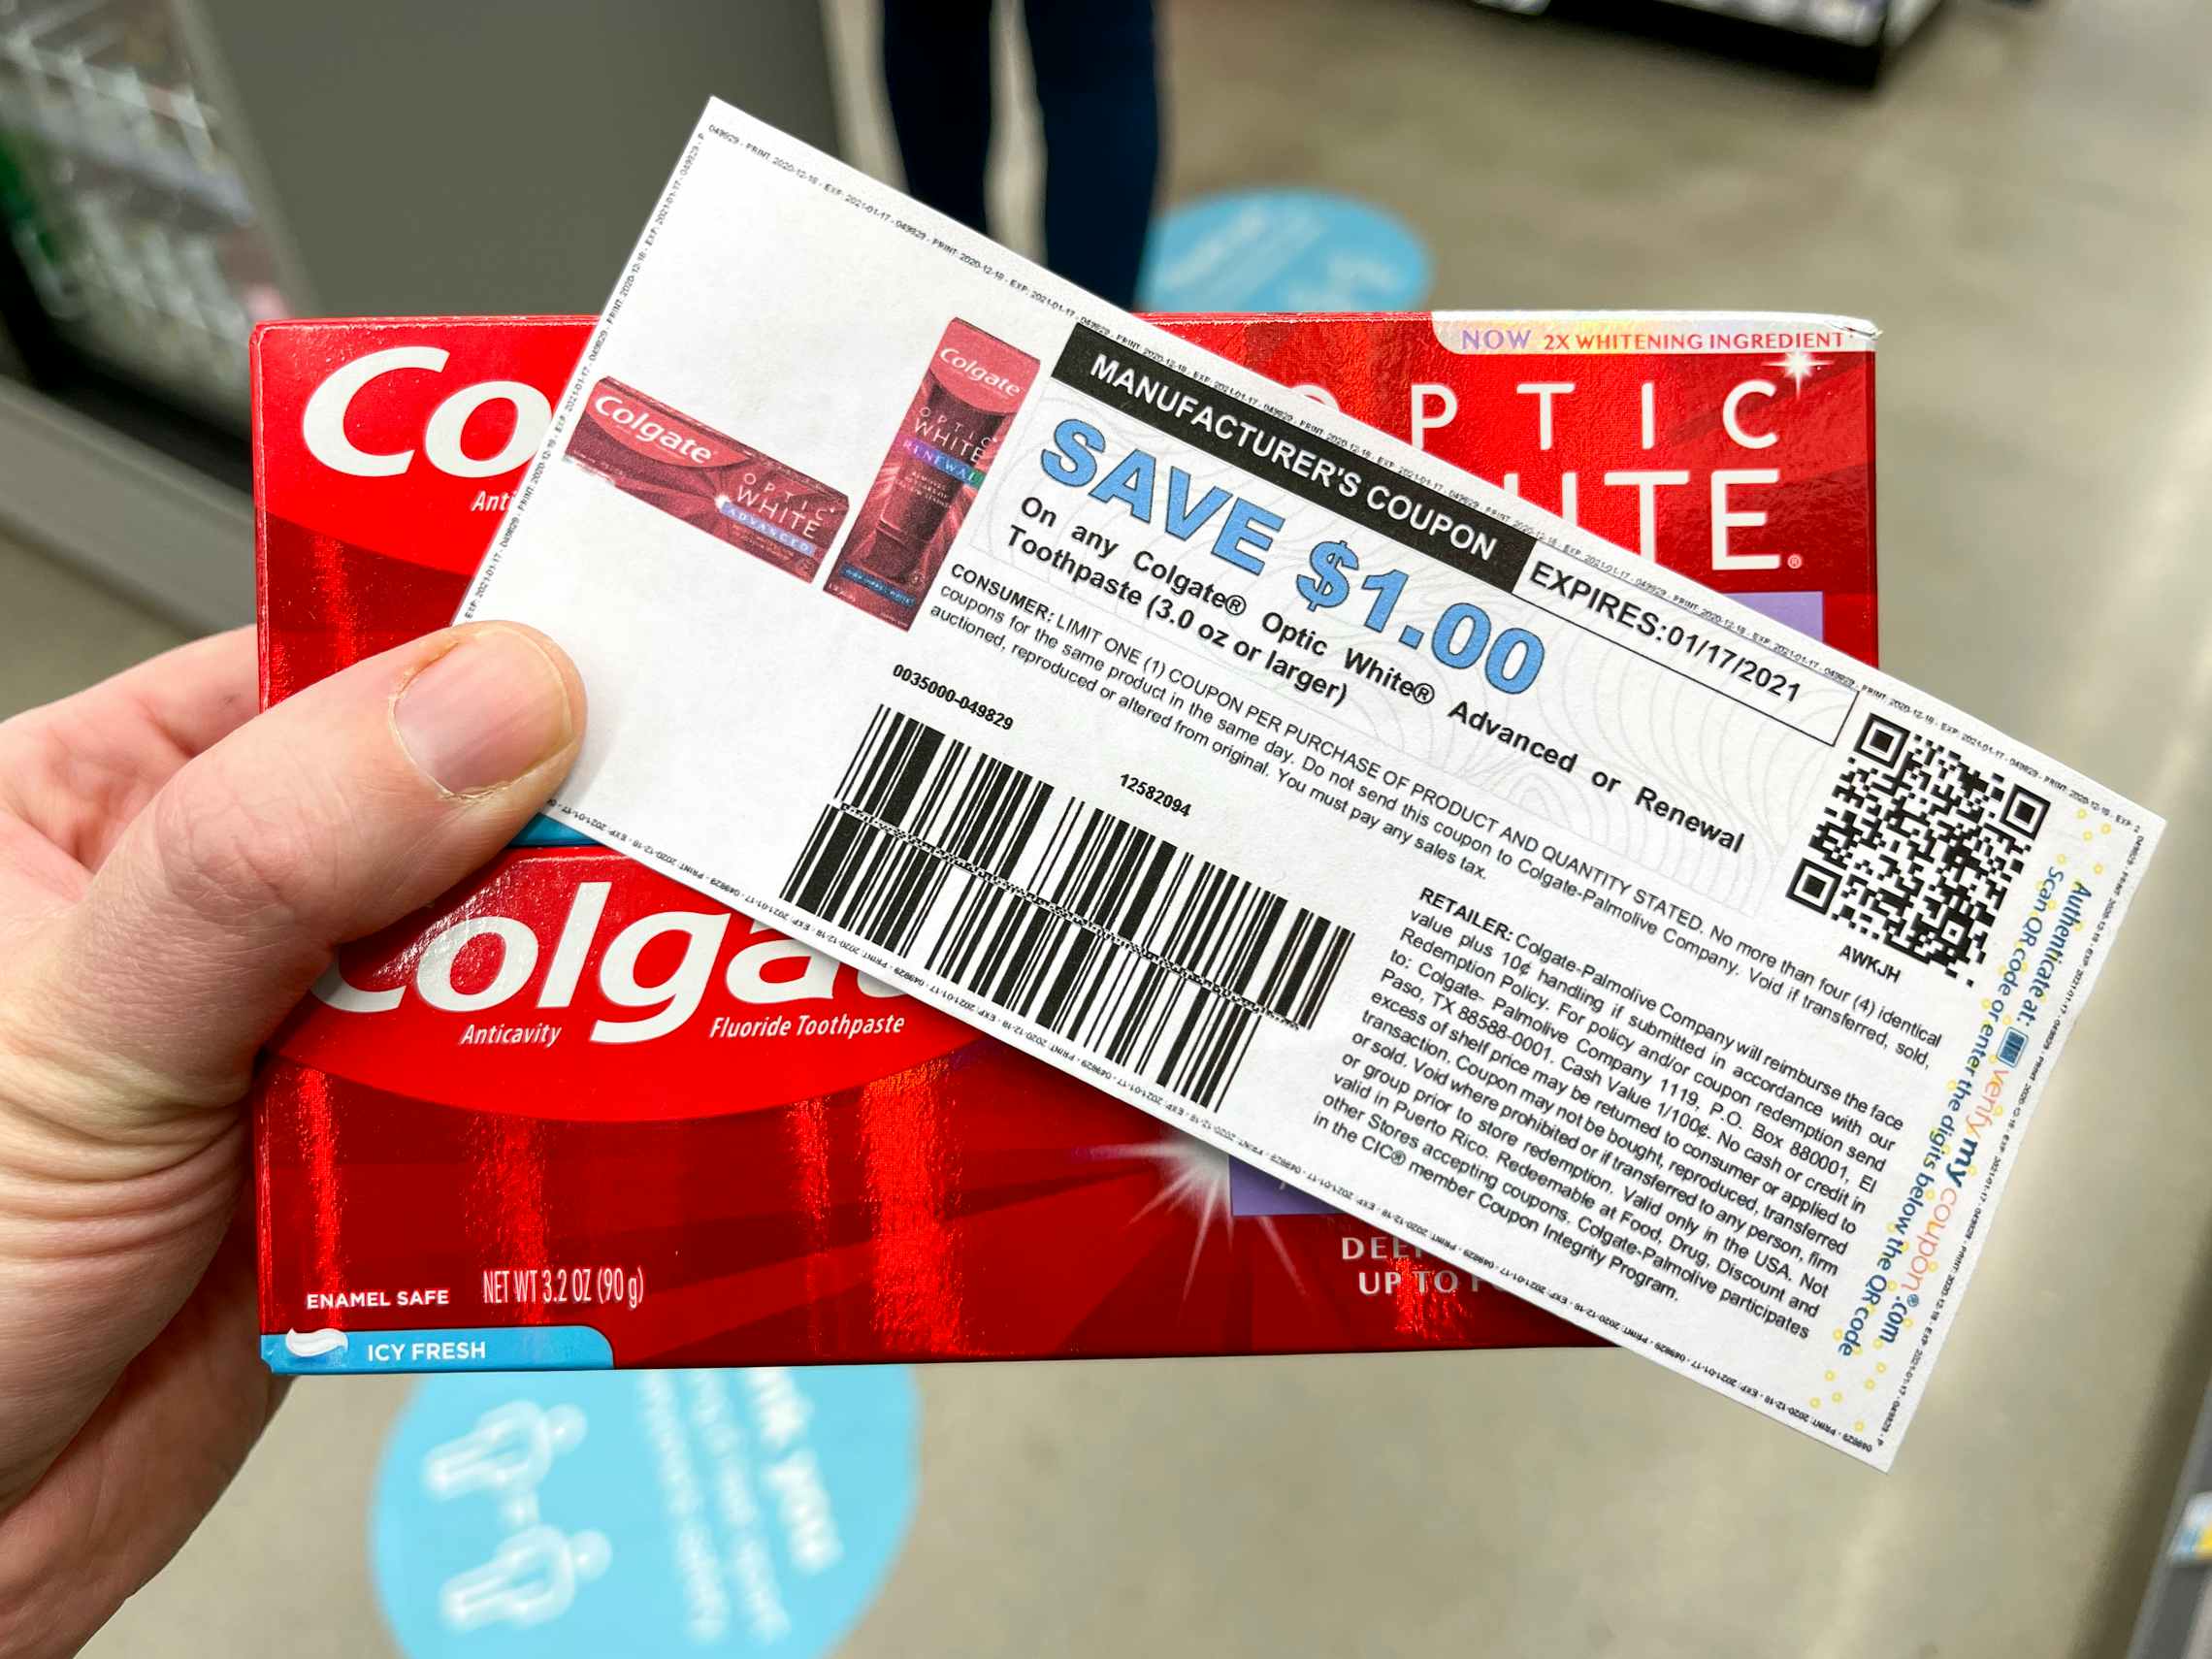 Colgate coupon with two tubes of toothpaste.